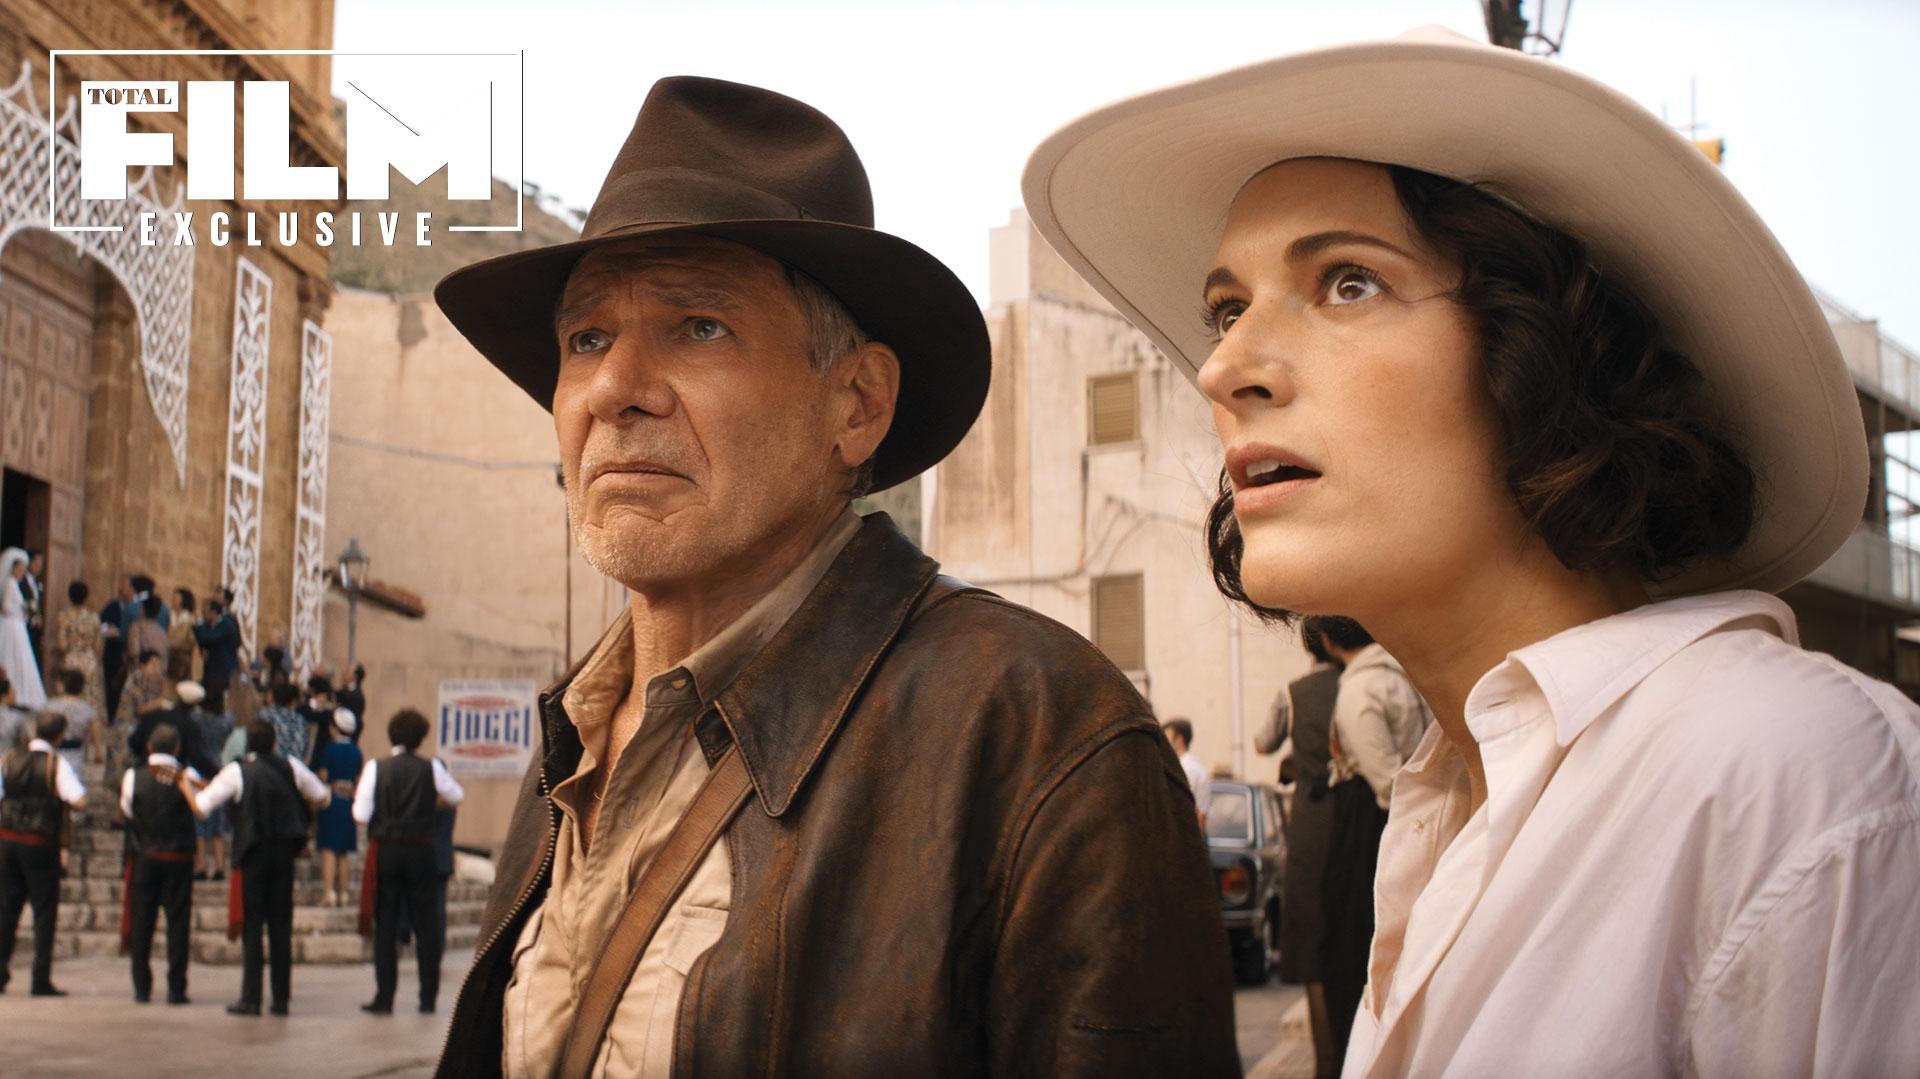 Phoebe Waller Bridge Teases Her Mysterious Indiana Jones And The